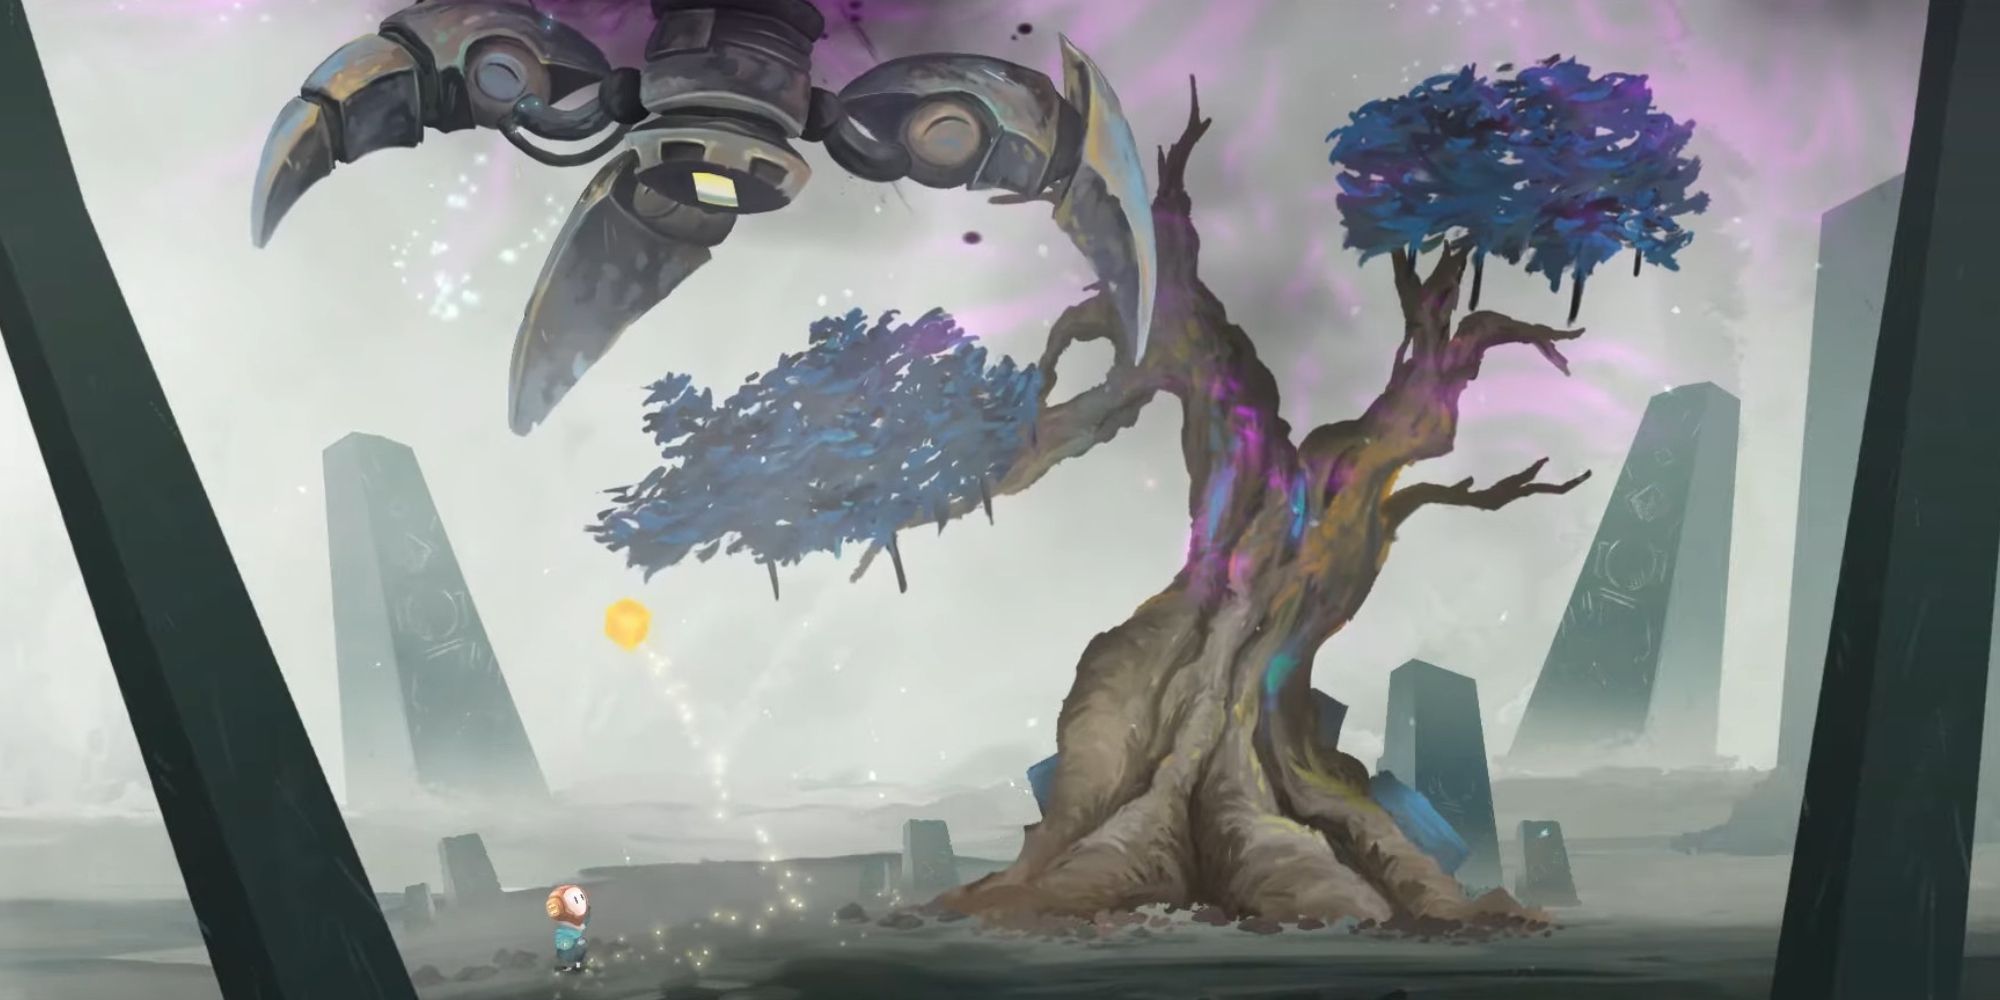 a wide shot of a young boy looking up at an ominous tree with a giant robot hand above it